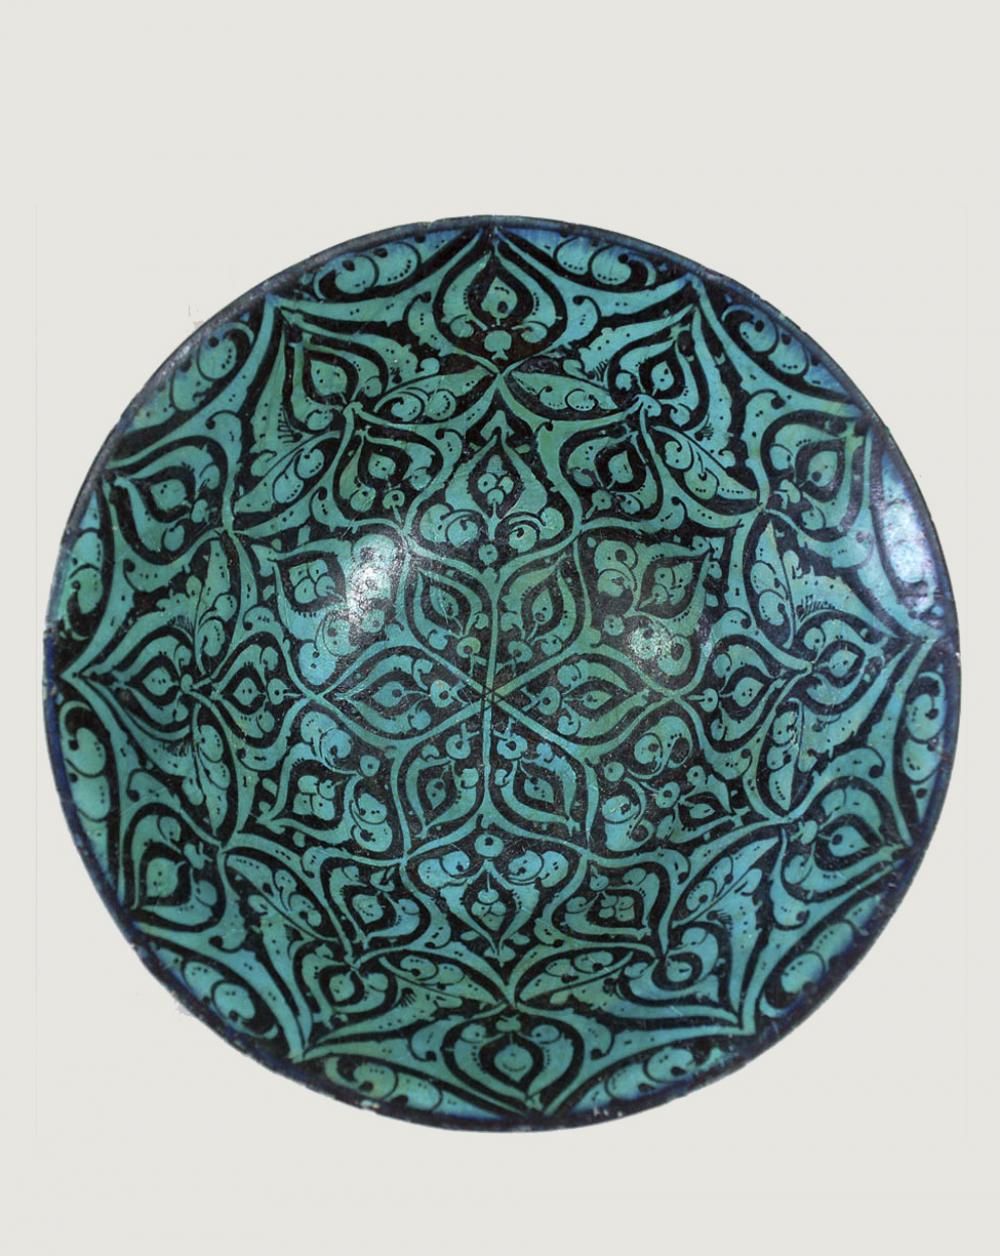 Maker Unknown (Persian), Bowl, early 13th century (Seljuq Period, 1037–1196)